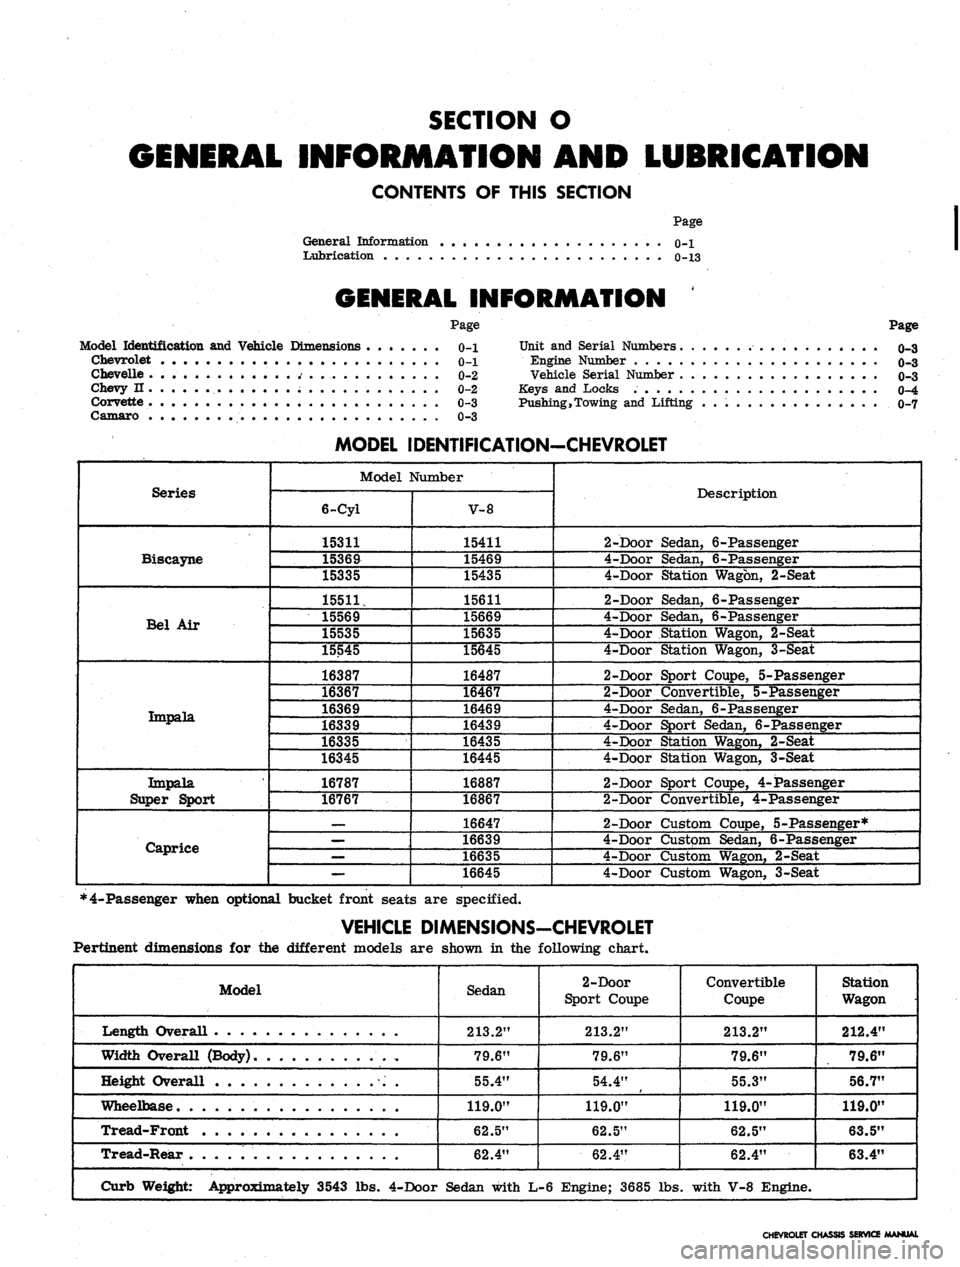 CHEVROLET CAMARO 1967 1.G Chassis Workshop Manual 
SECTION O

INFORMATION AND LUBRICATION

CONTENTS OF THIS SECTION

Page

General Information o-l

Lubrication 0-13

GENERAL INFORMATION

Model Identification and Vehicle Dimensions

Chevrolet

Chevell